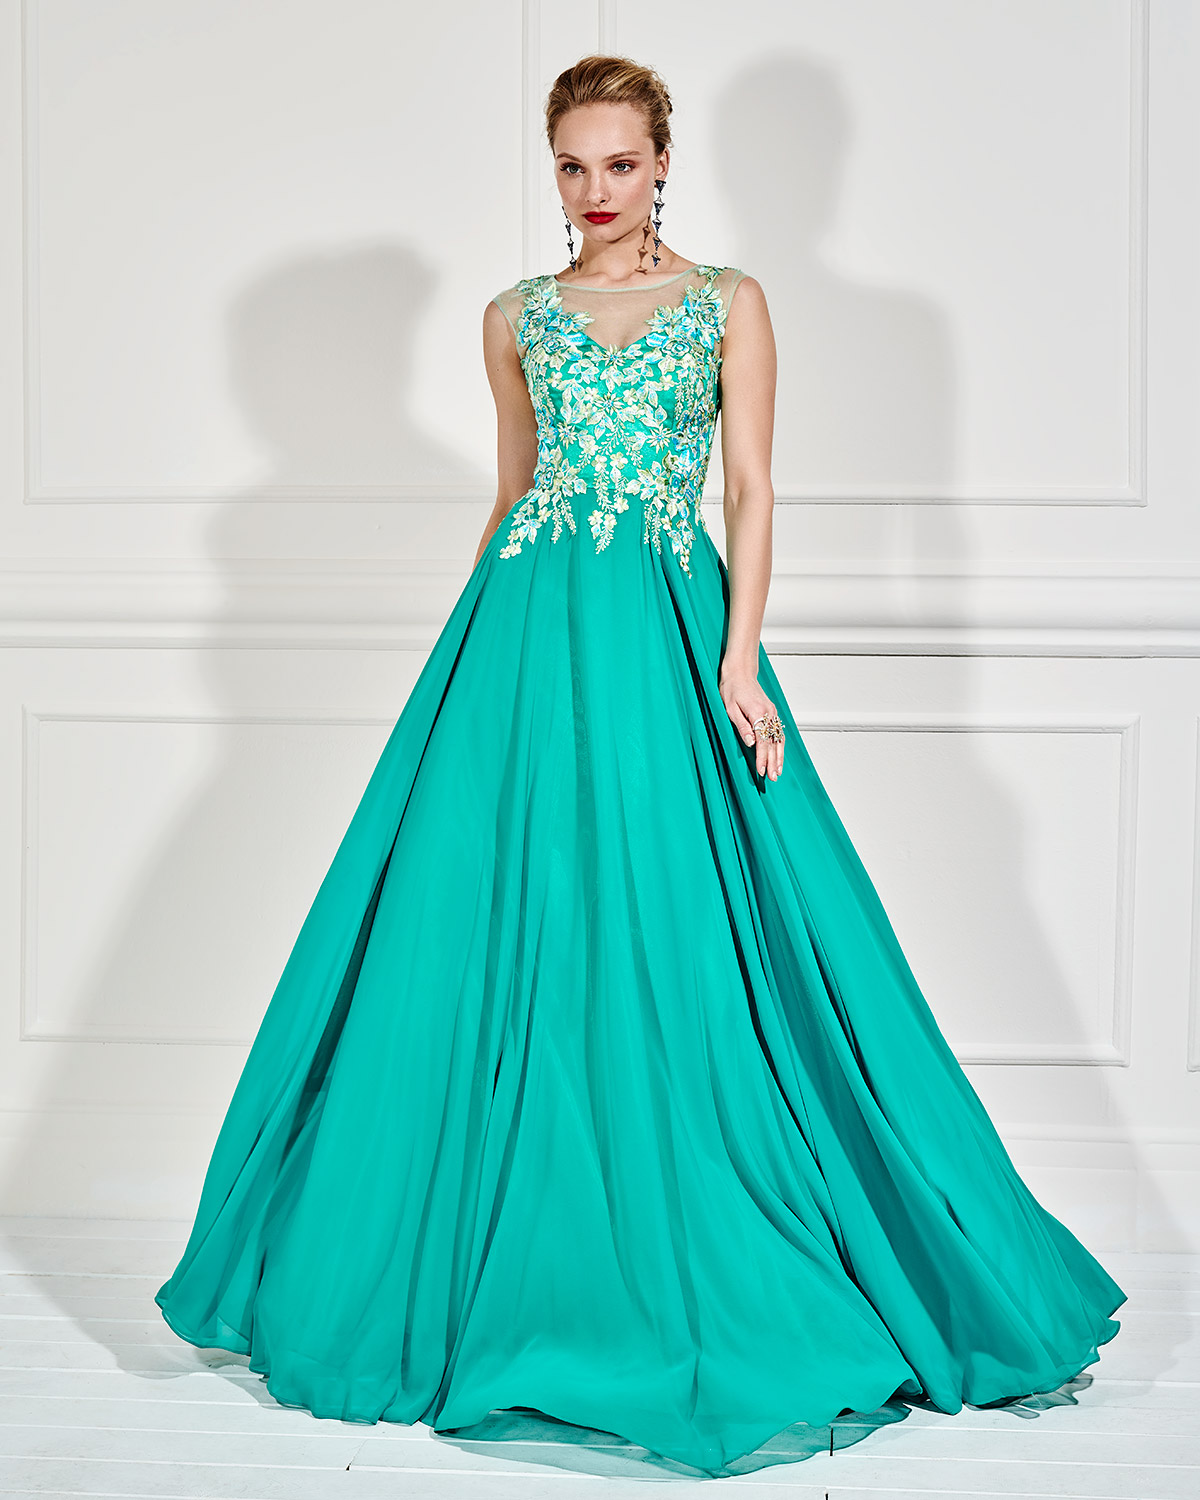 Evening Dresses / Long evening dress with applique flowers and beading